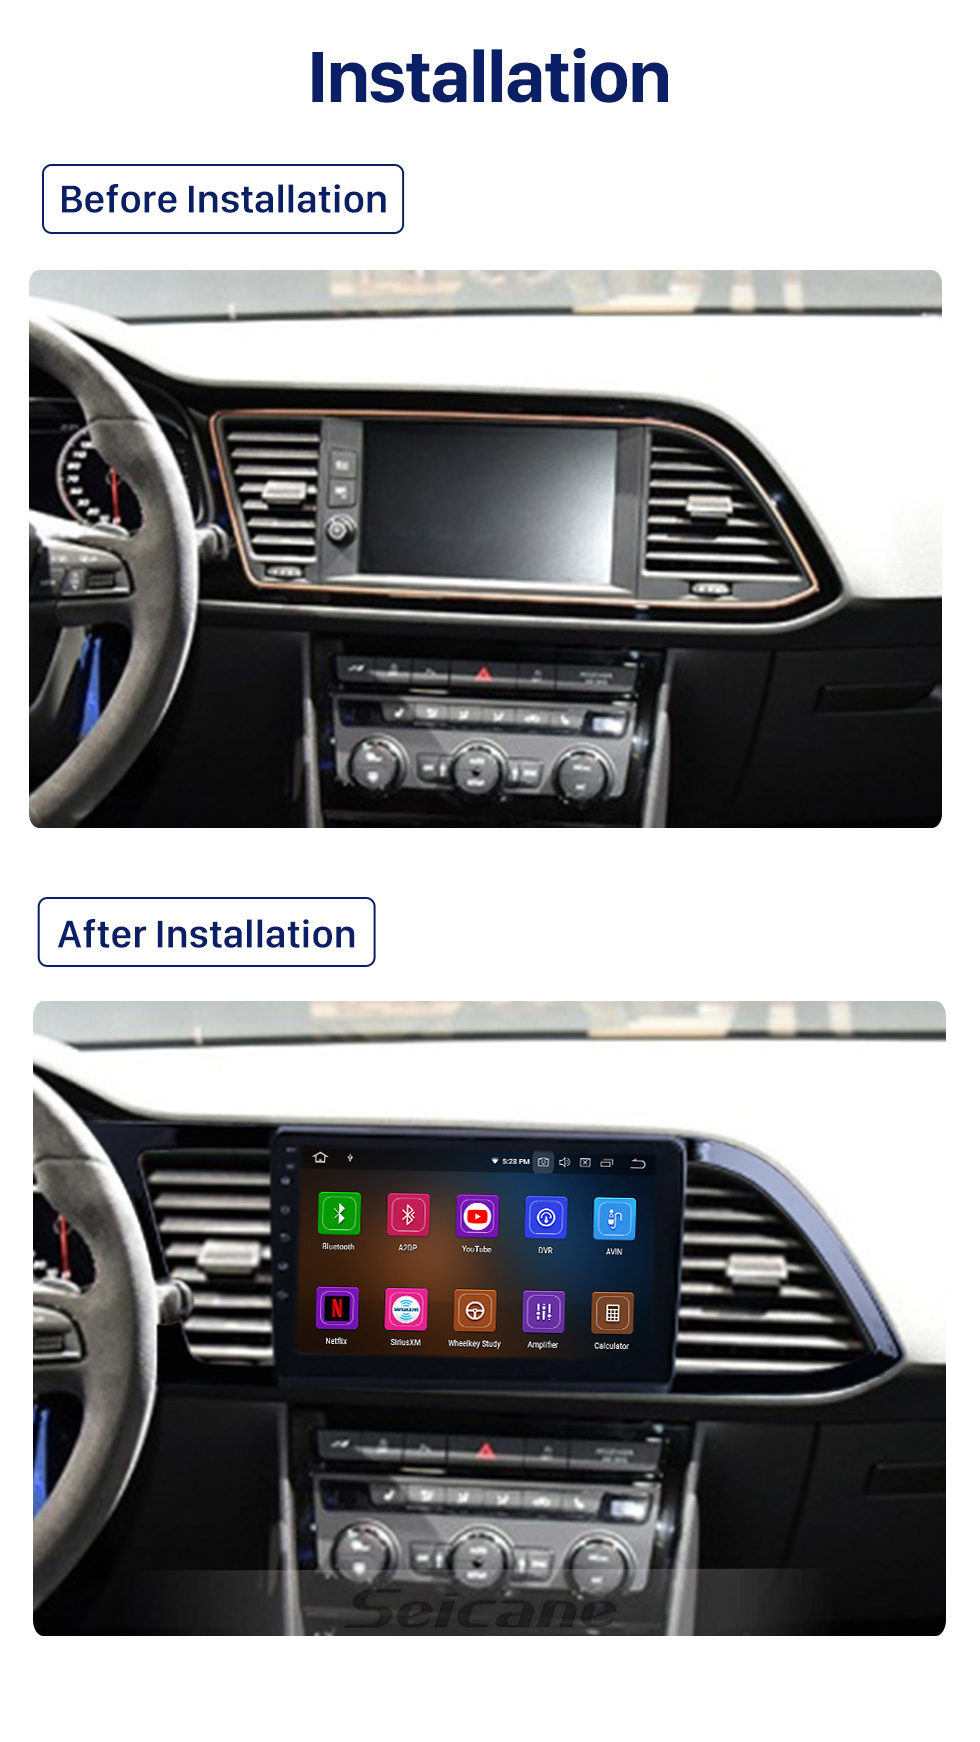 lava comienzo oficial 9 Inch HD Touchscreen for 2018 Seat Leon Autostereo Car Radio Stereo Player  Sat Navi Support AHD Camera